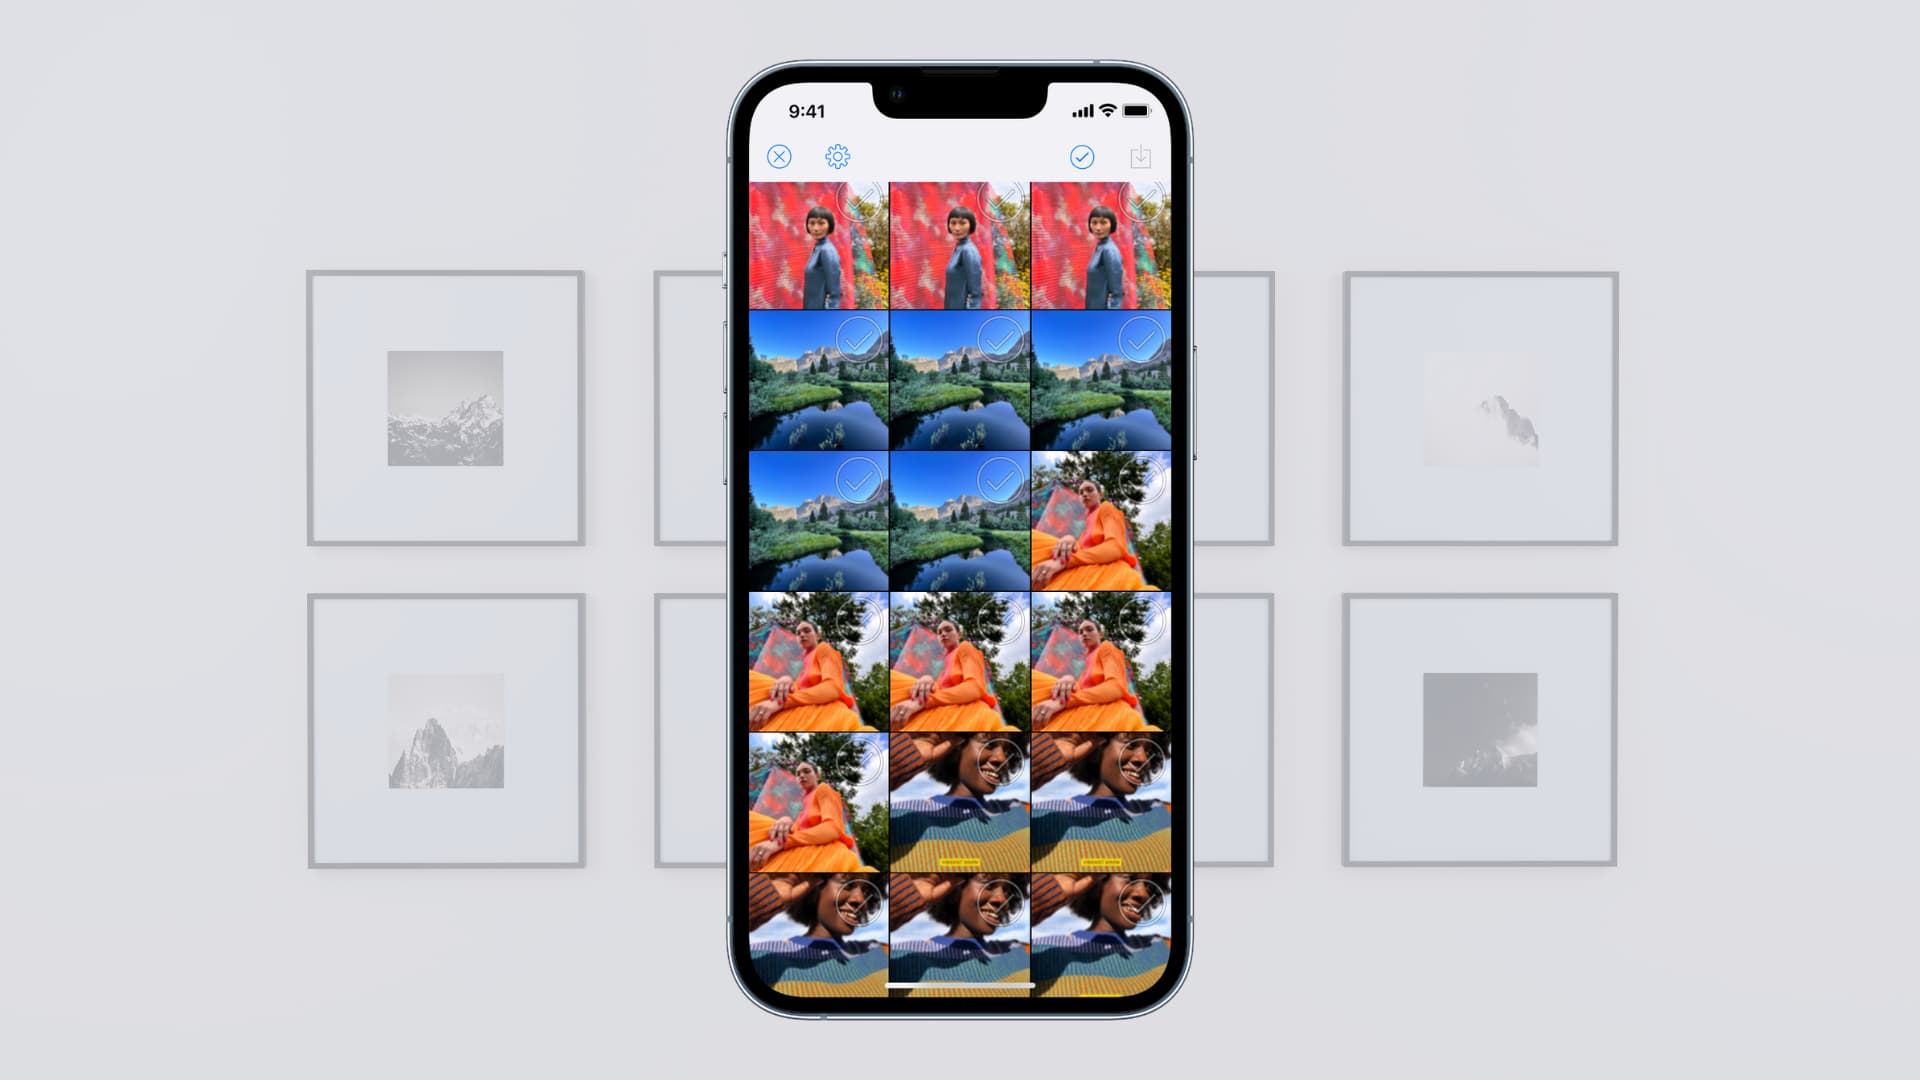 How to save all images from webpage on iPhone